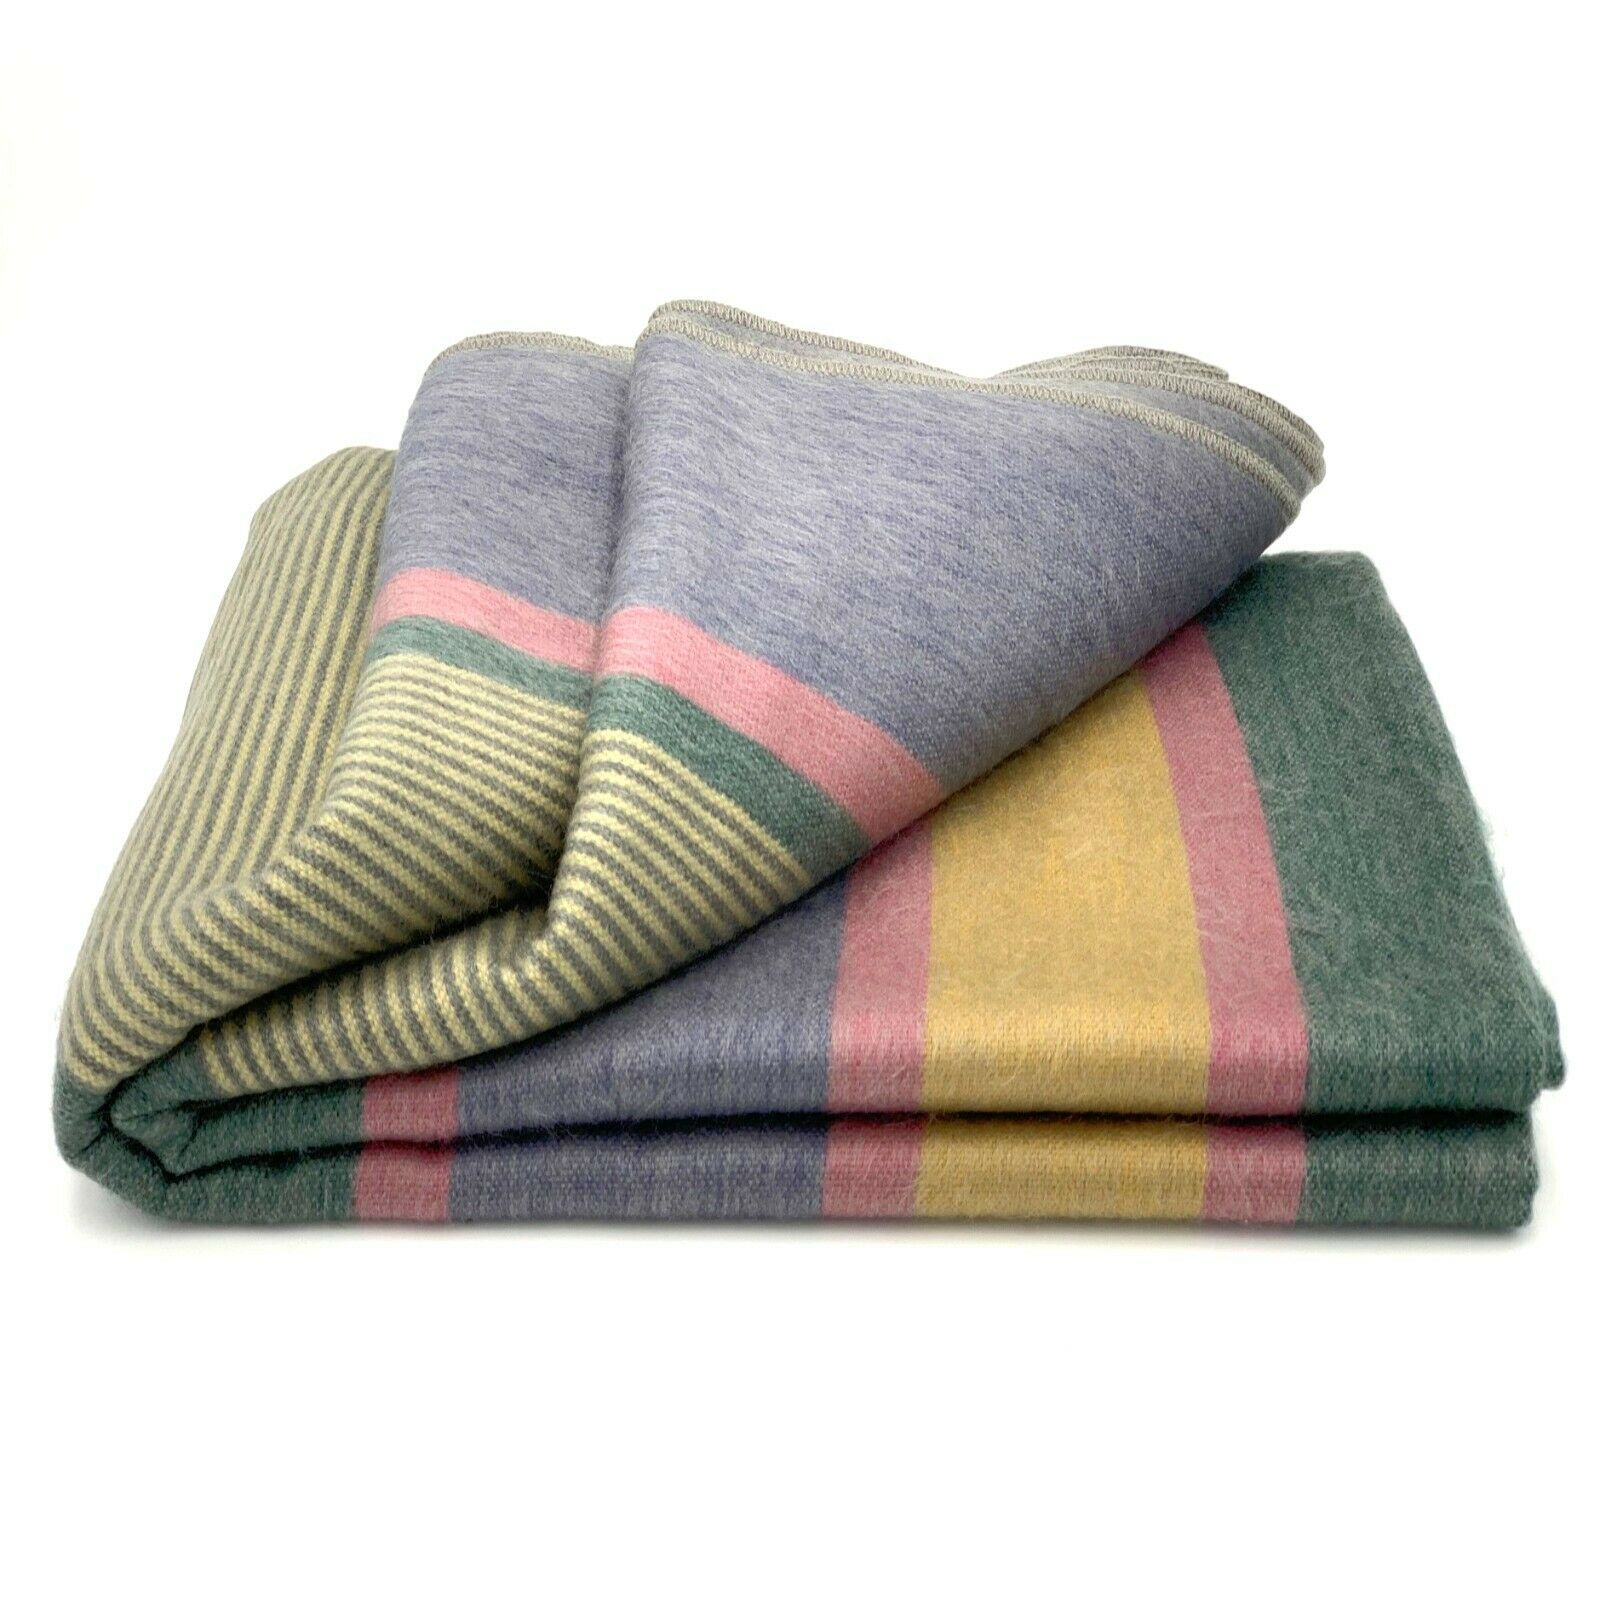 Guagua - Baby Alpaca Wool Throw Blanket / Sofa Cover - Queen 97" x 67" - multi colored stripes pattern